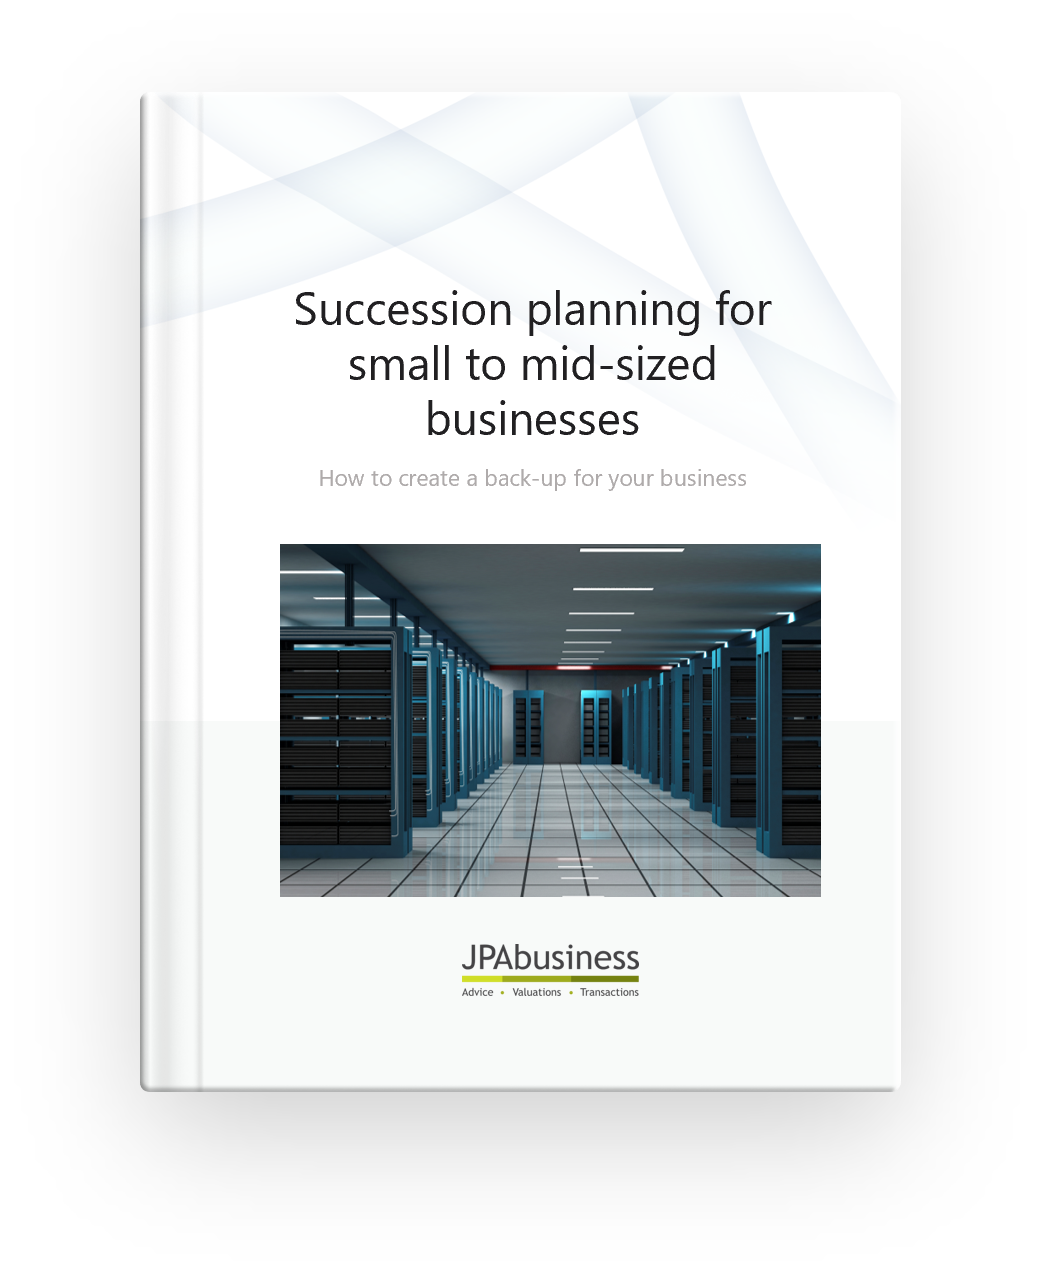 Succession planning - how to create a back-up cover 2022